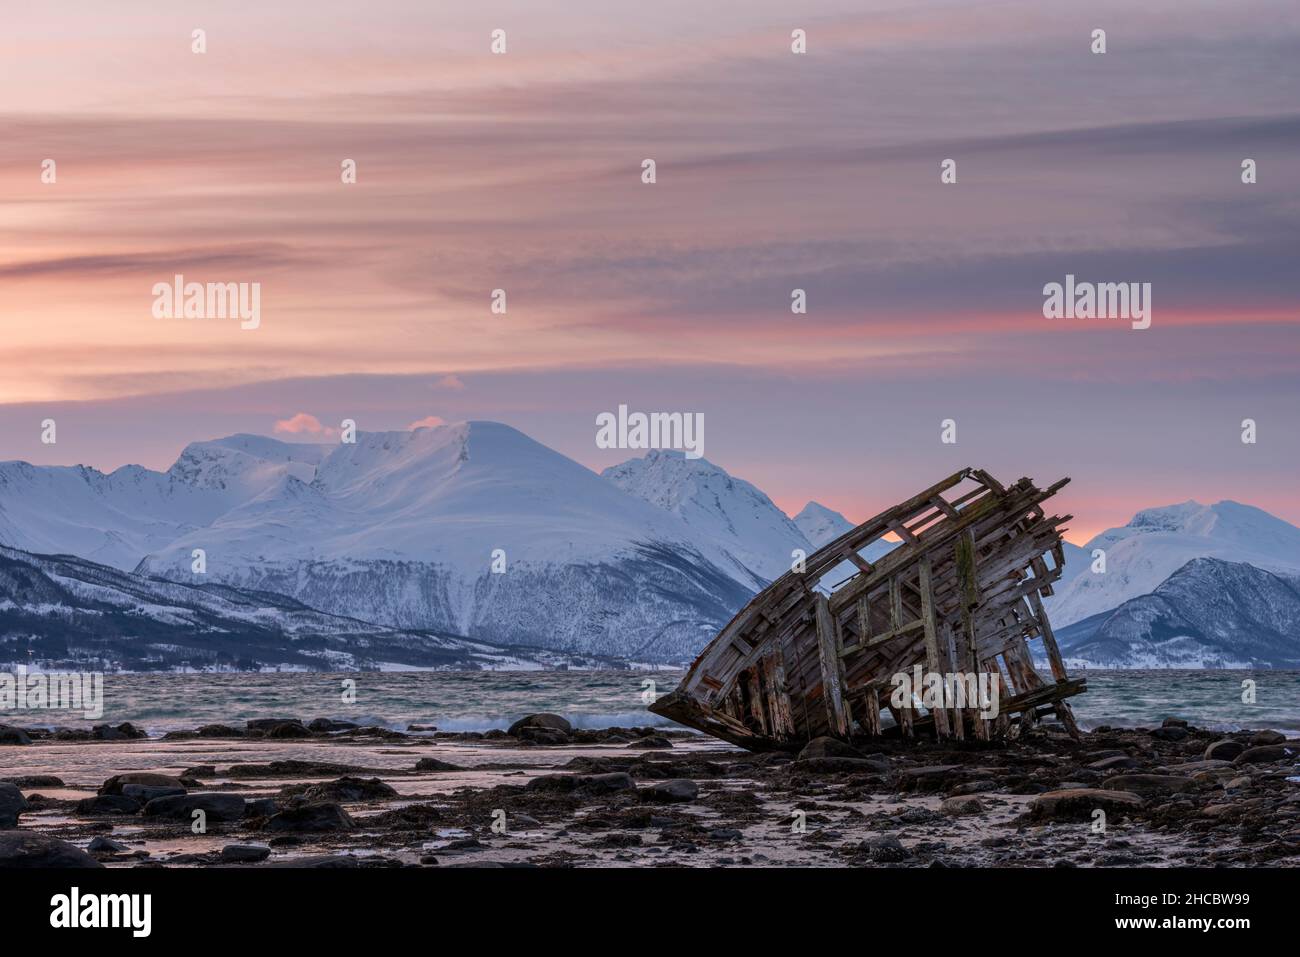 Shipwreck lying on shore of secluded Fjord at winter dawn Stock Photo